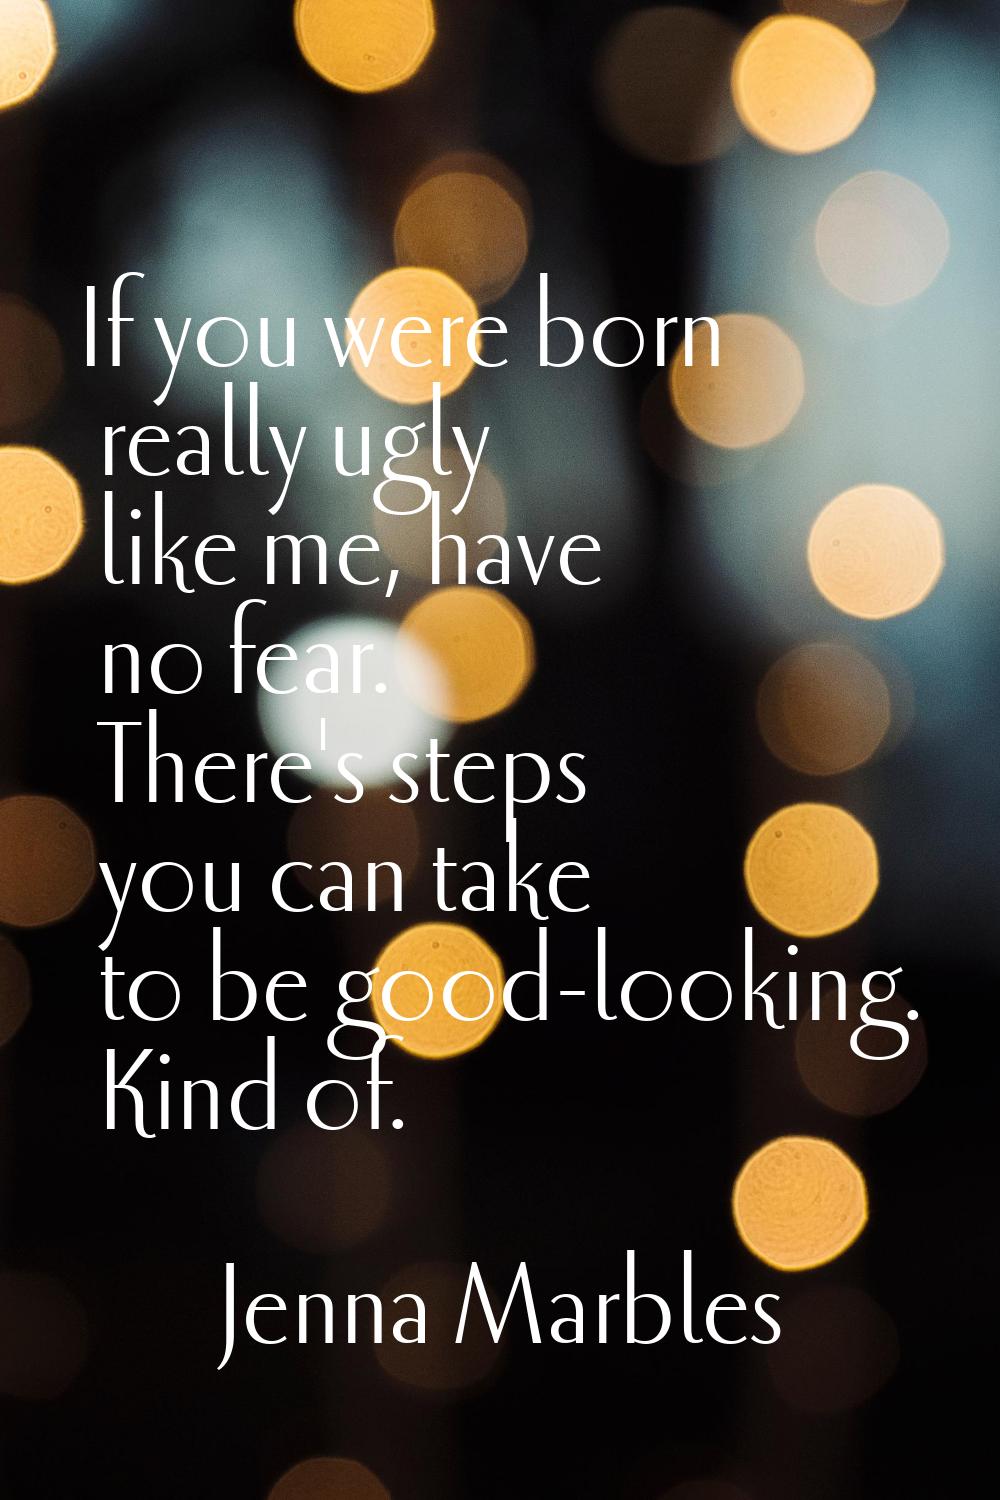 If you were born really ugly like me, have no fear. There's steps you can take to be good-looking. 